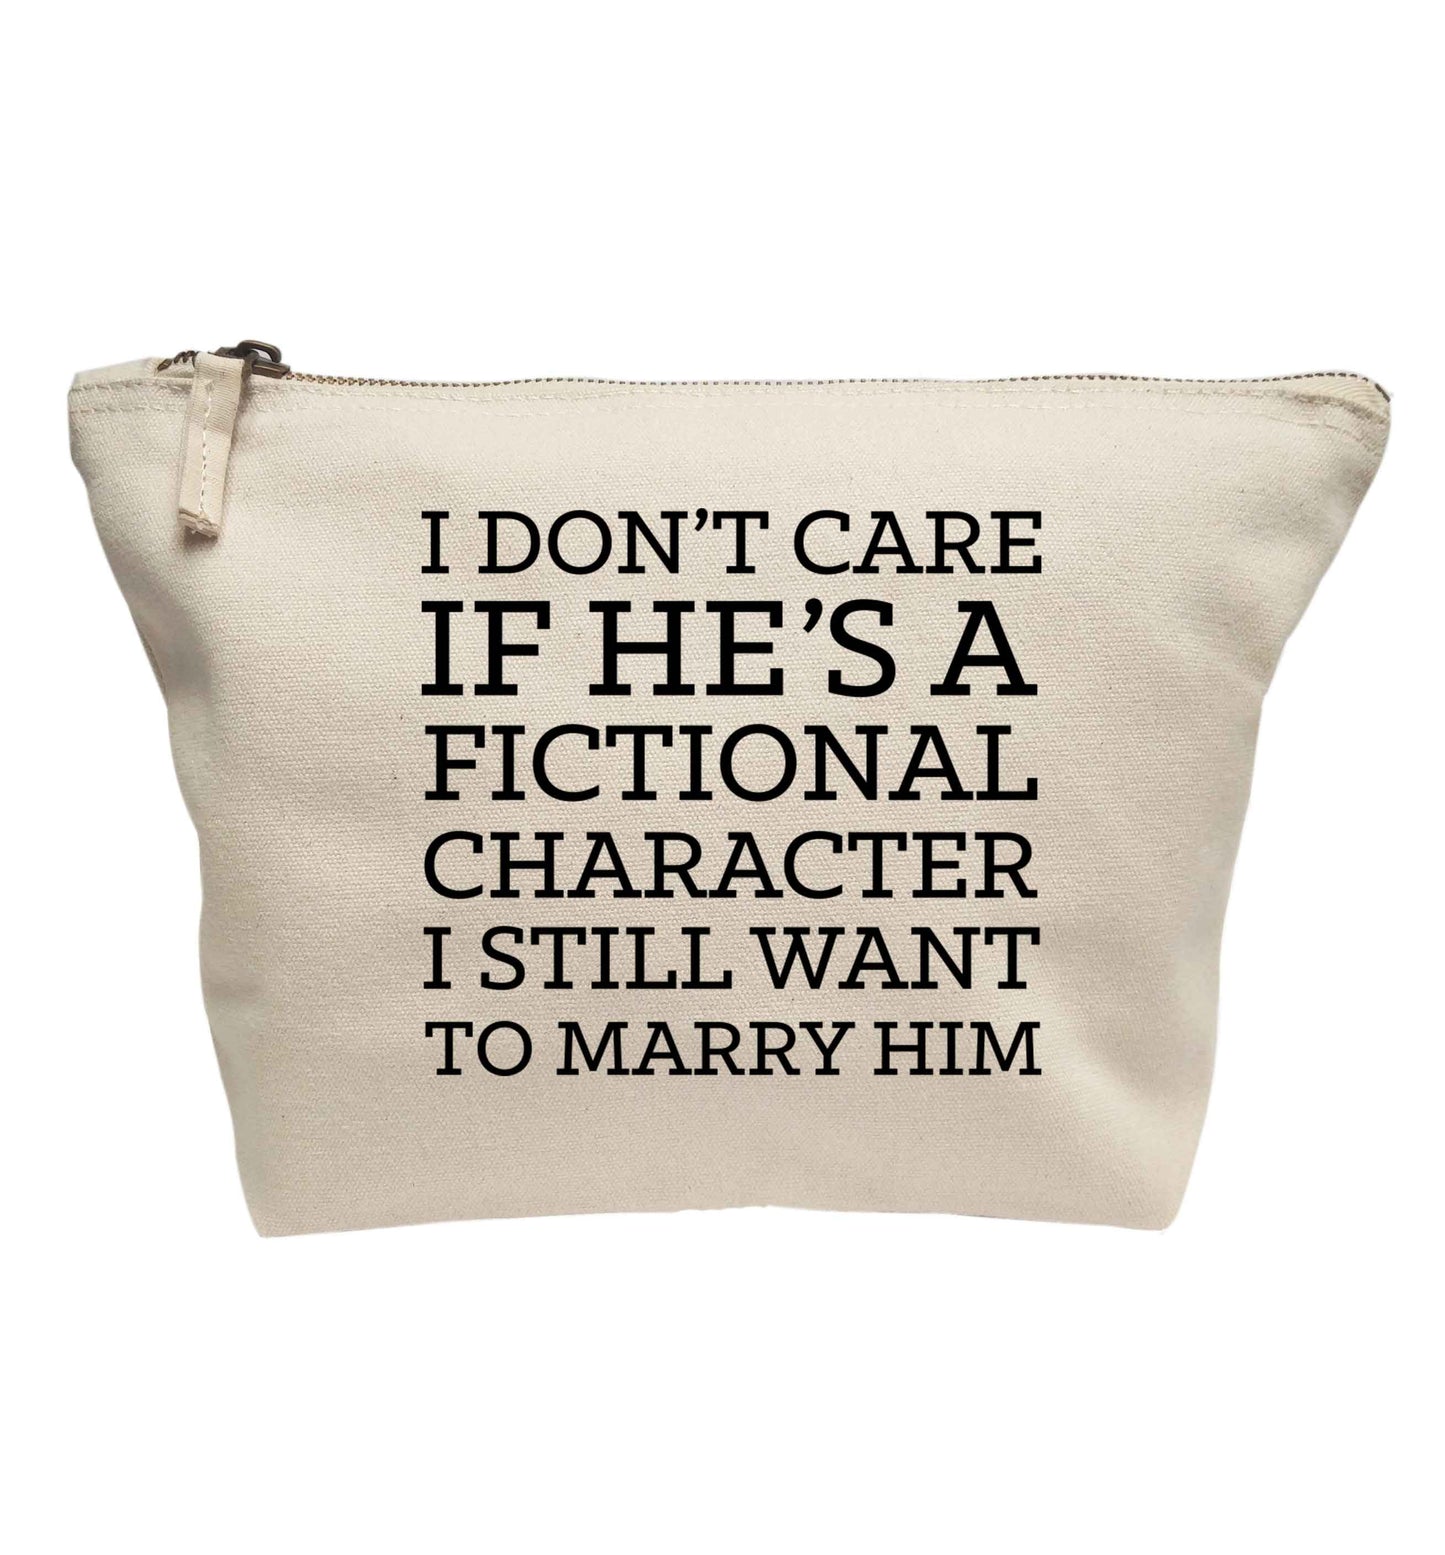 I don't care if he's a fictional character I still want to marry him | Makeup / wash bag